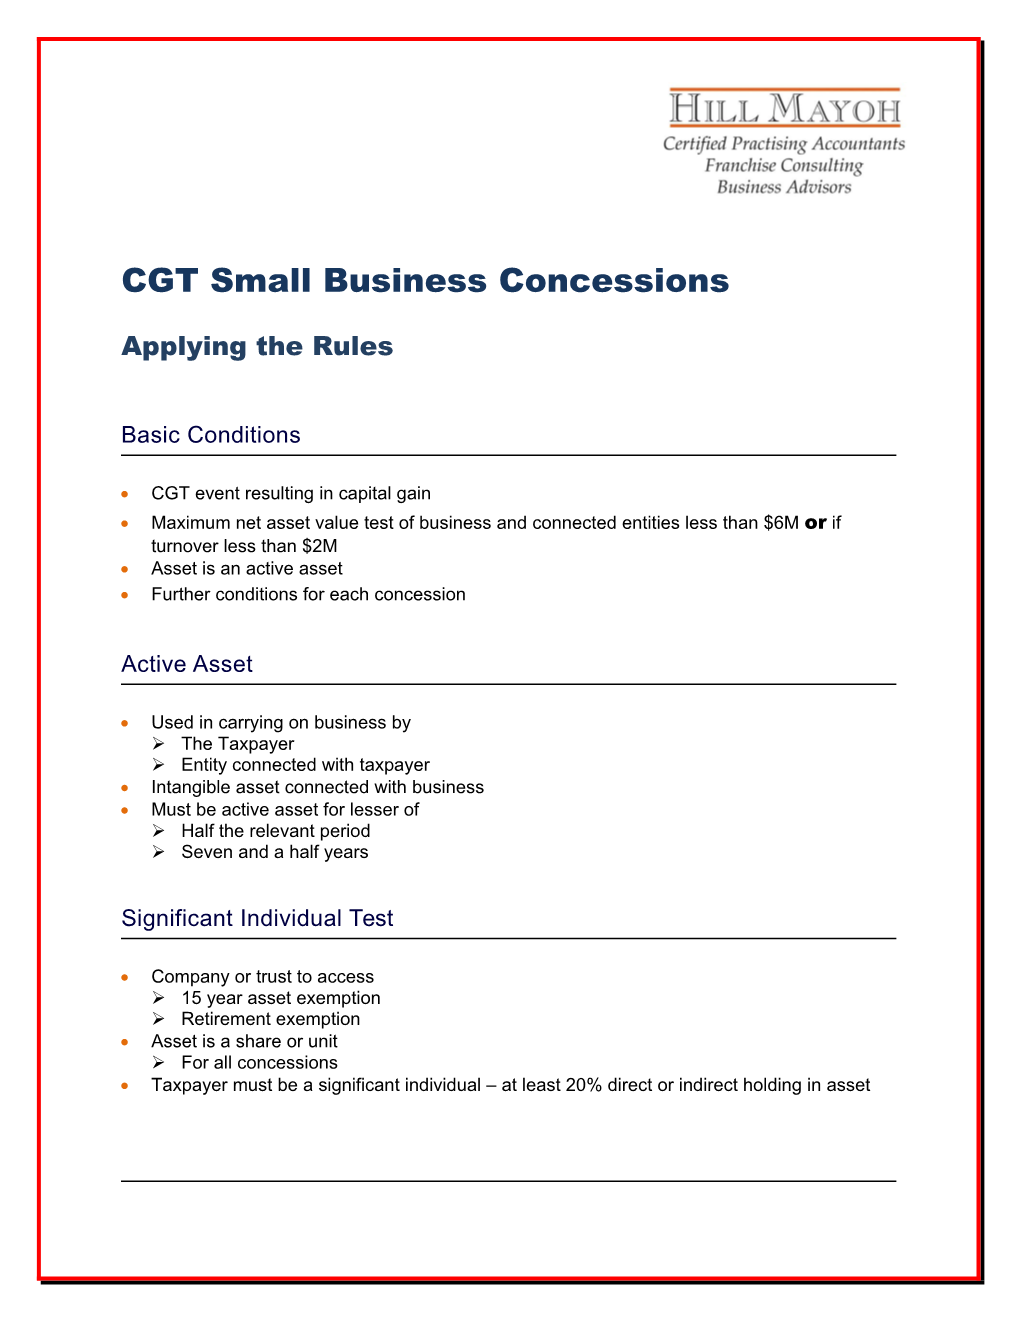 CGT Small Business Concession